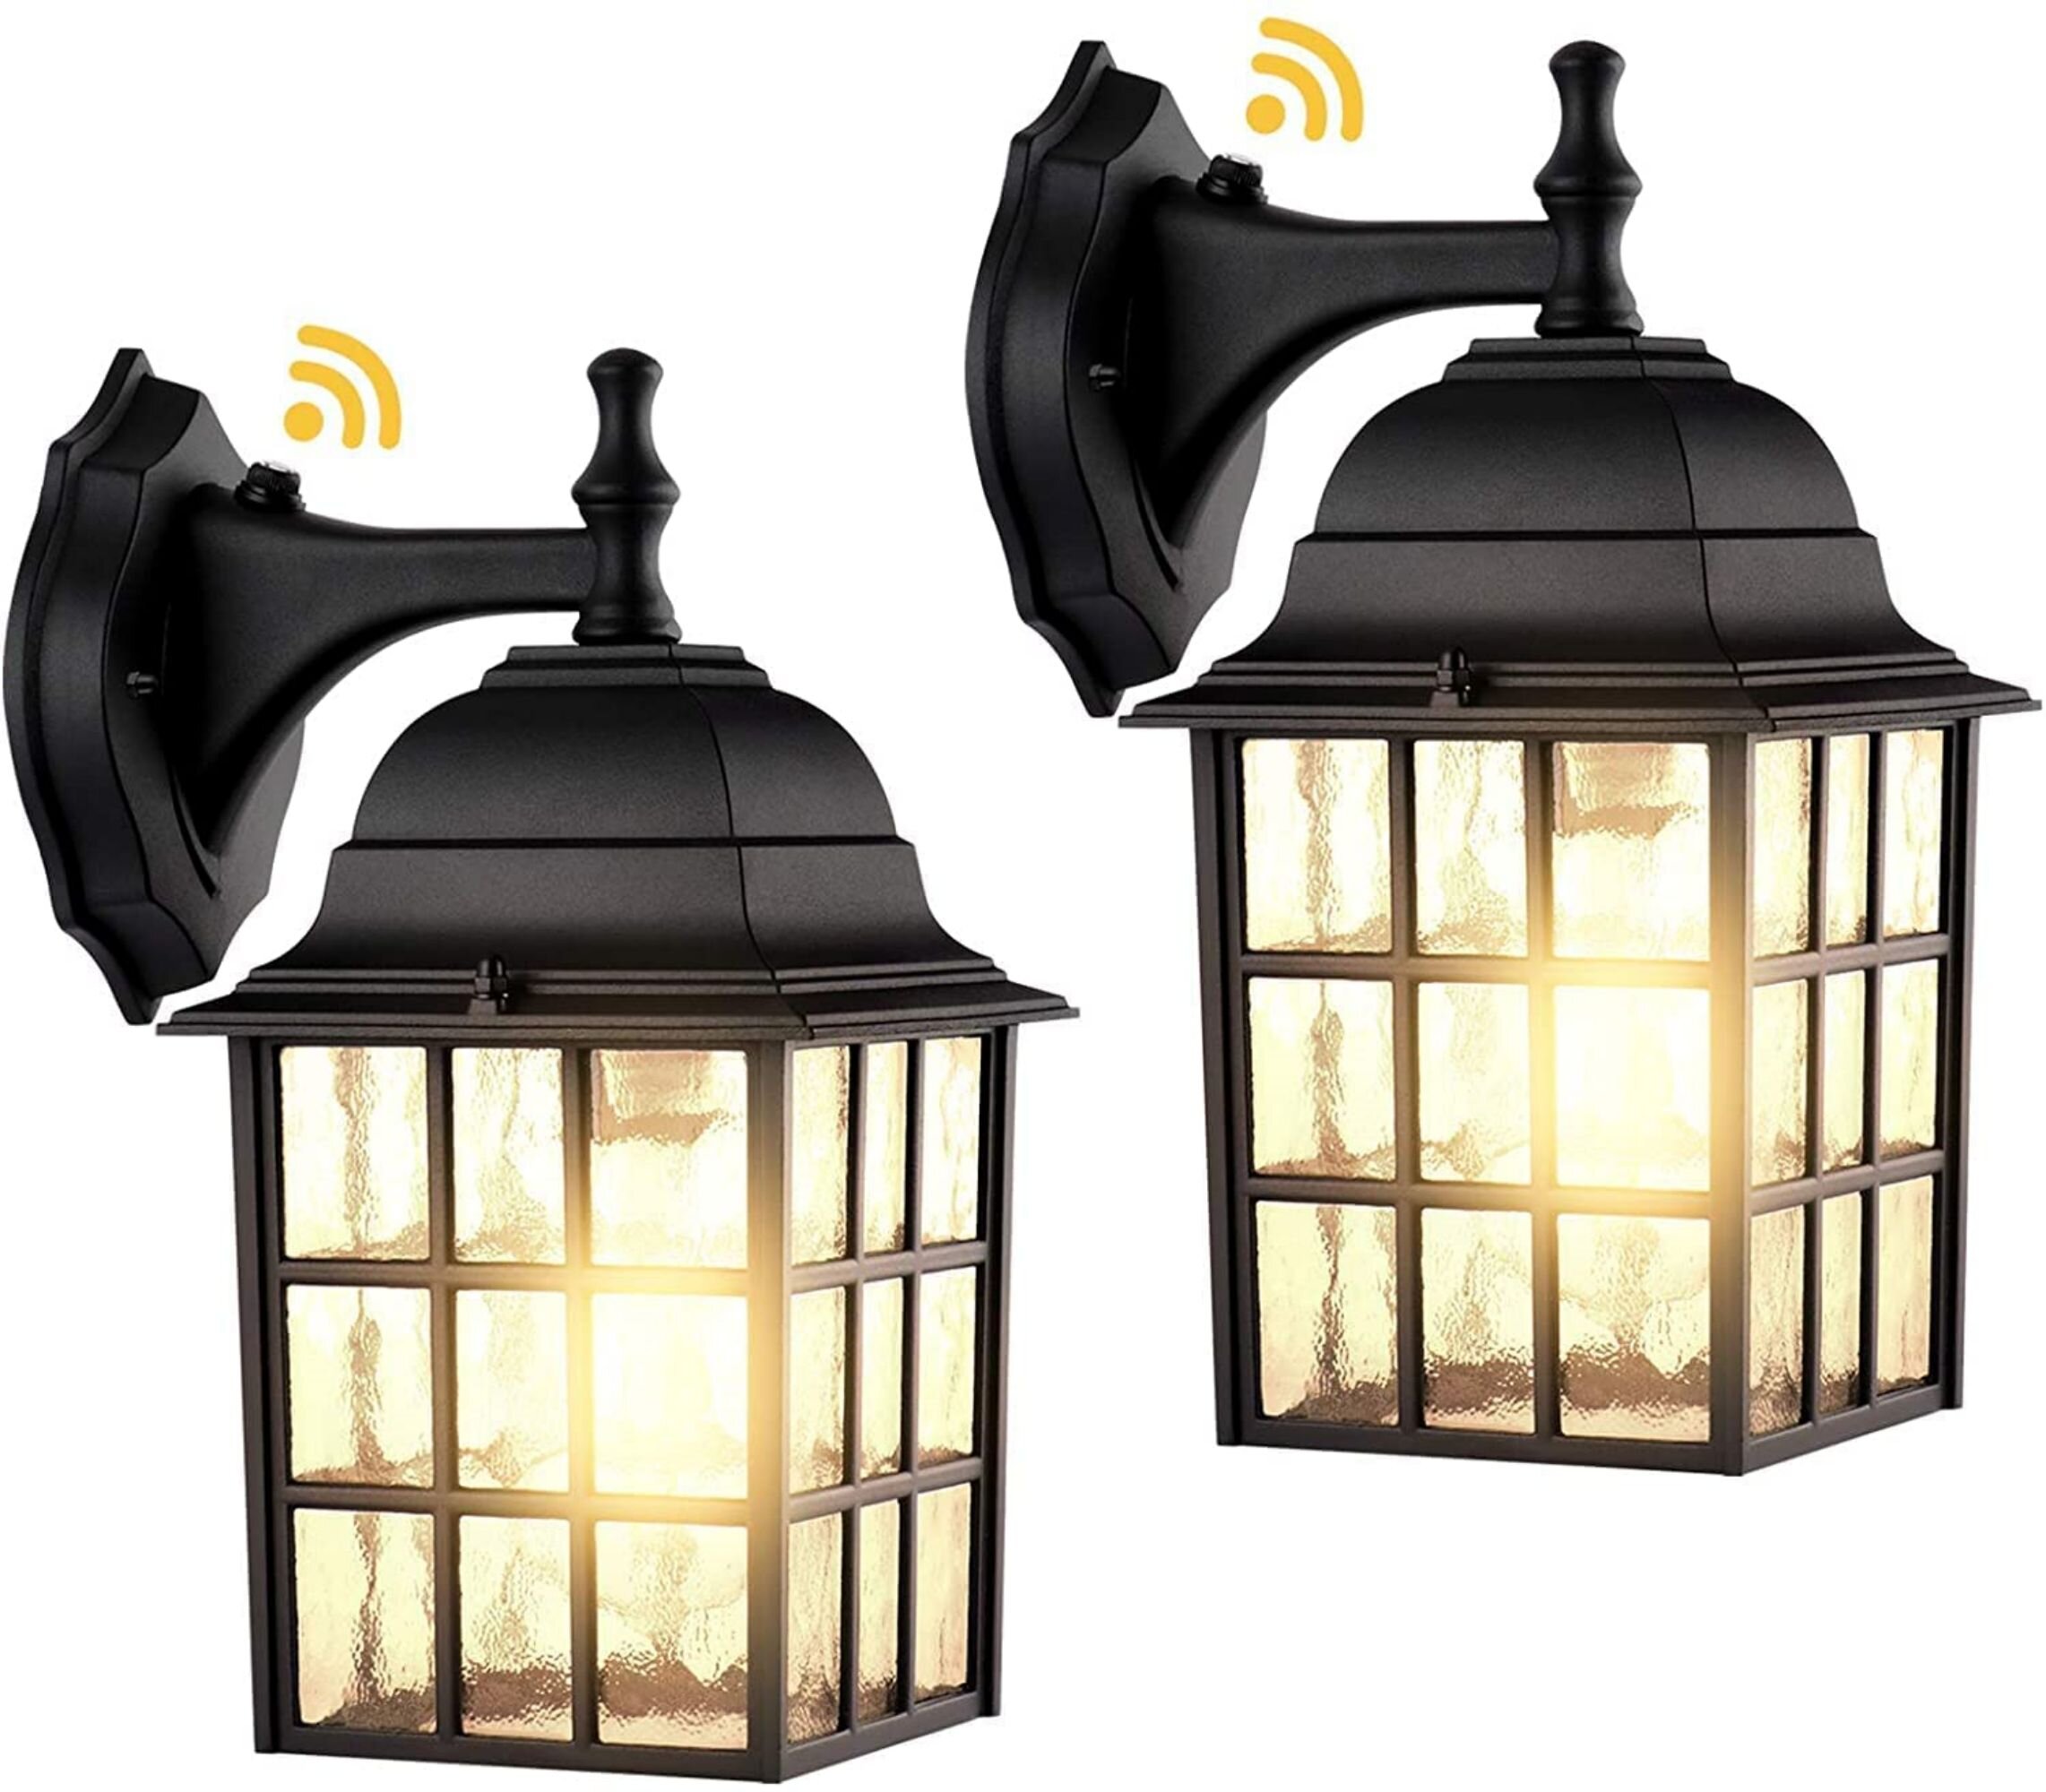 Outdoor Wall Lantern Light Fixture Dusk To Dawn Led Wall Sconce Lamp Porch Black 